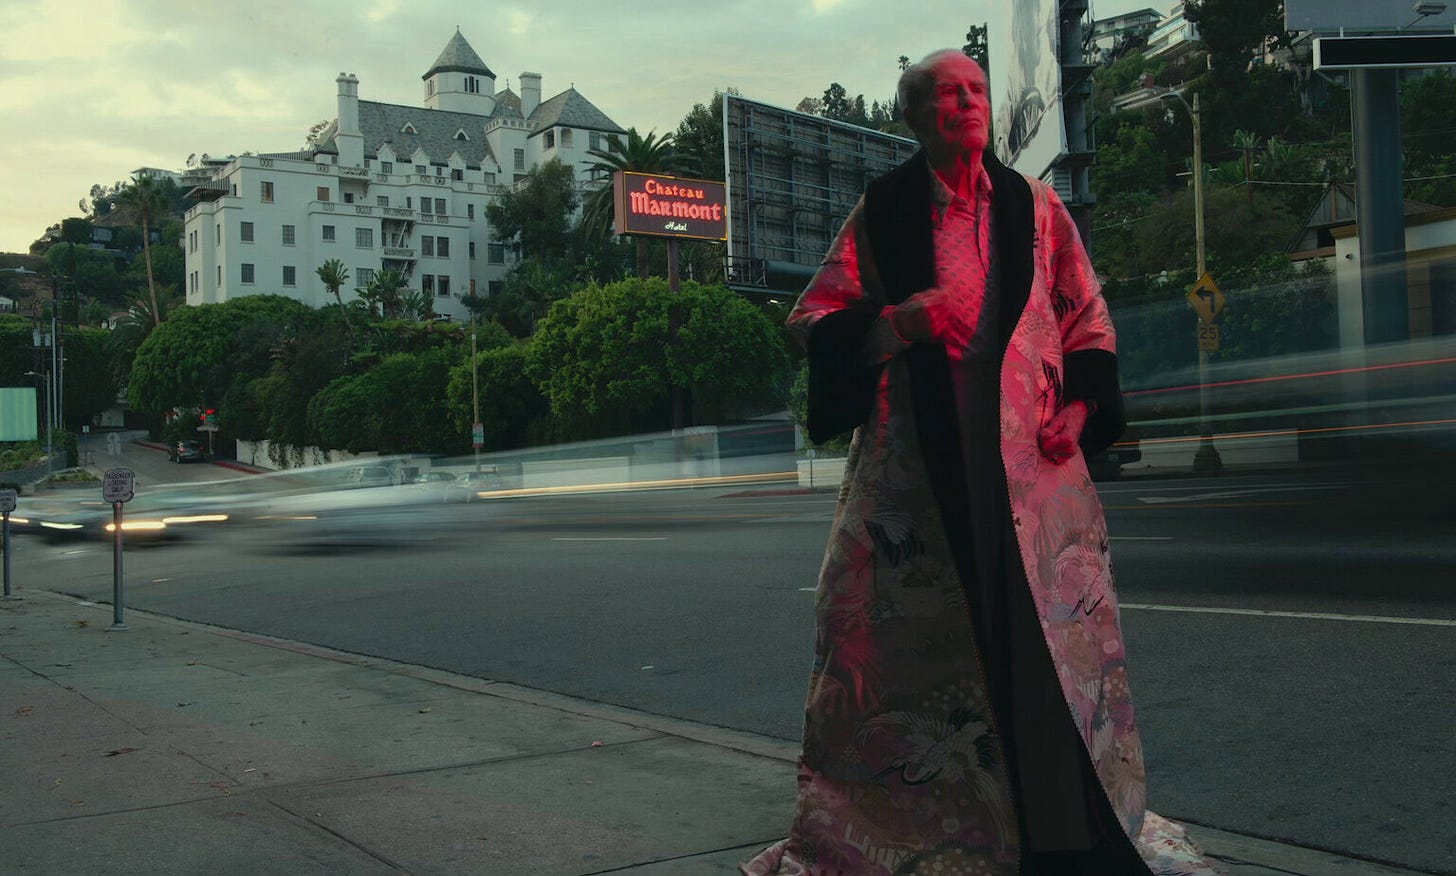 Photograph of film-maker and writer Kenneth Anger, wearing an elaborate brocade cape in the street outside the famous Hollywood Hotel Chateau Marmont. Wikimedia Commons.